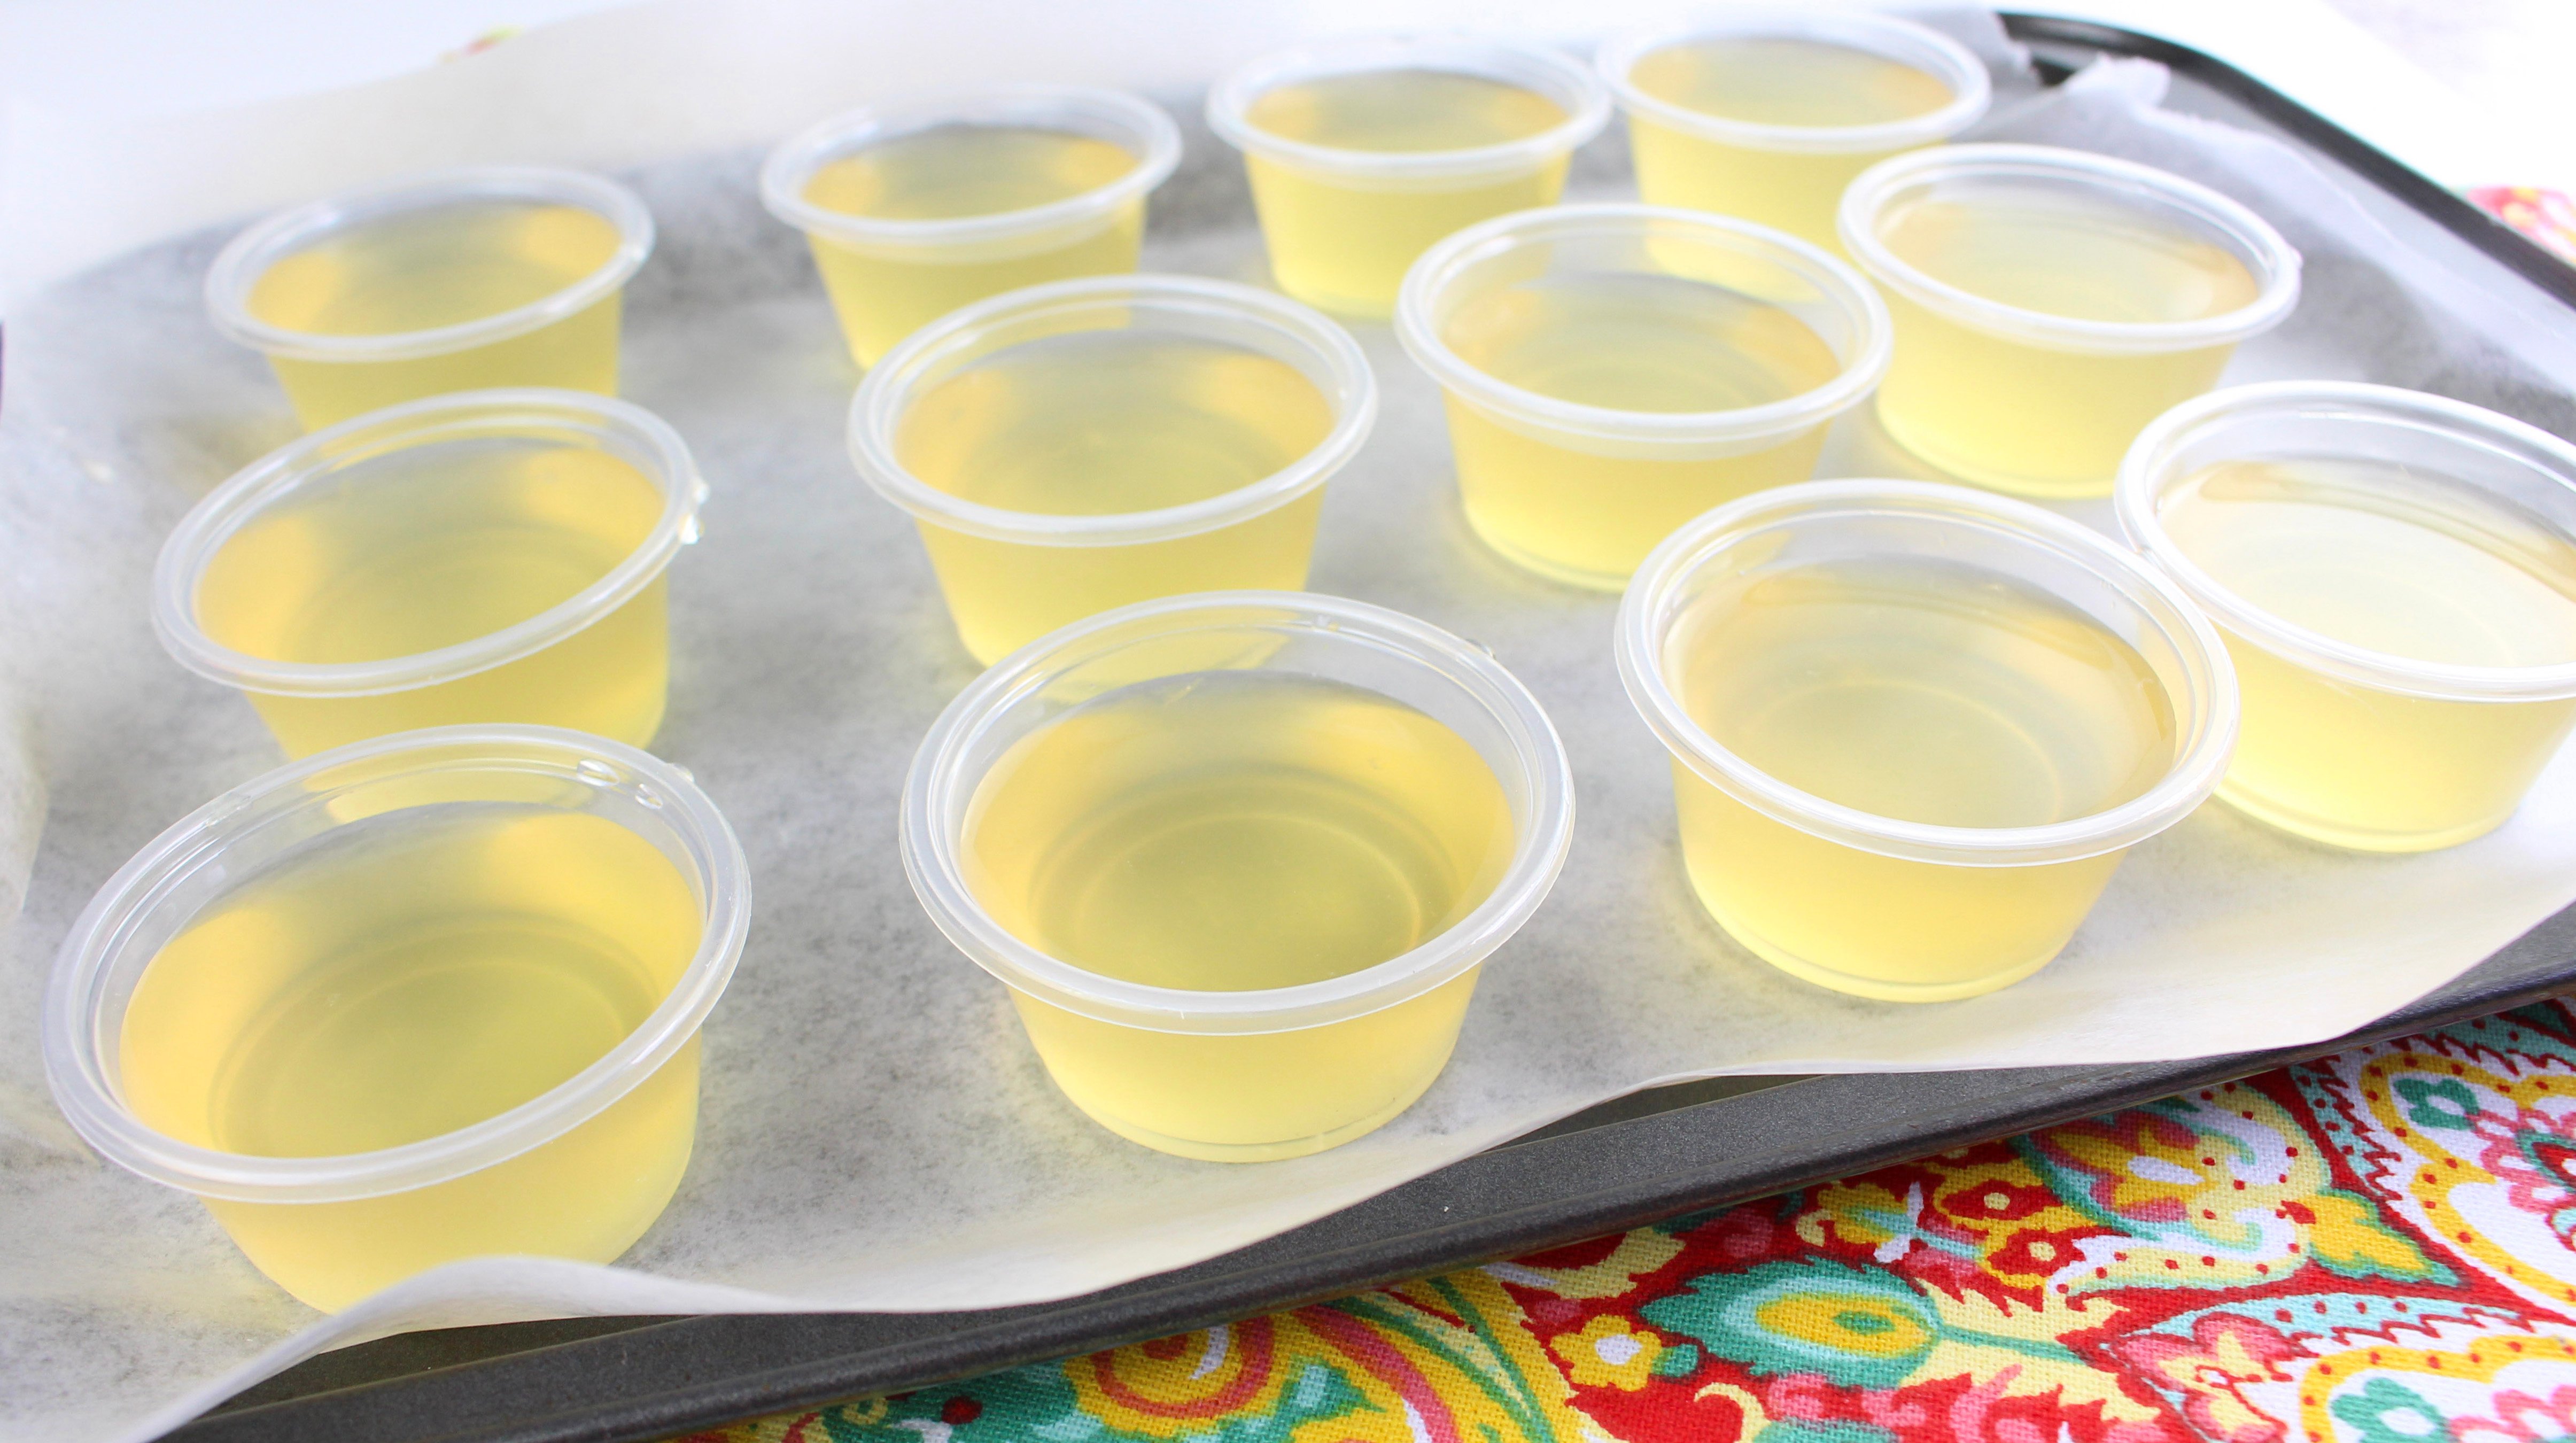 poured mixture into jello shot containers